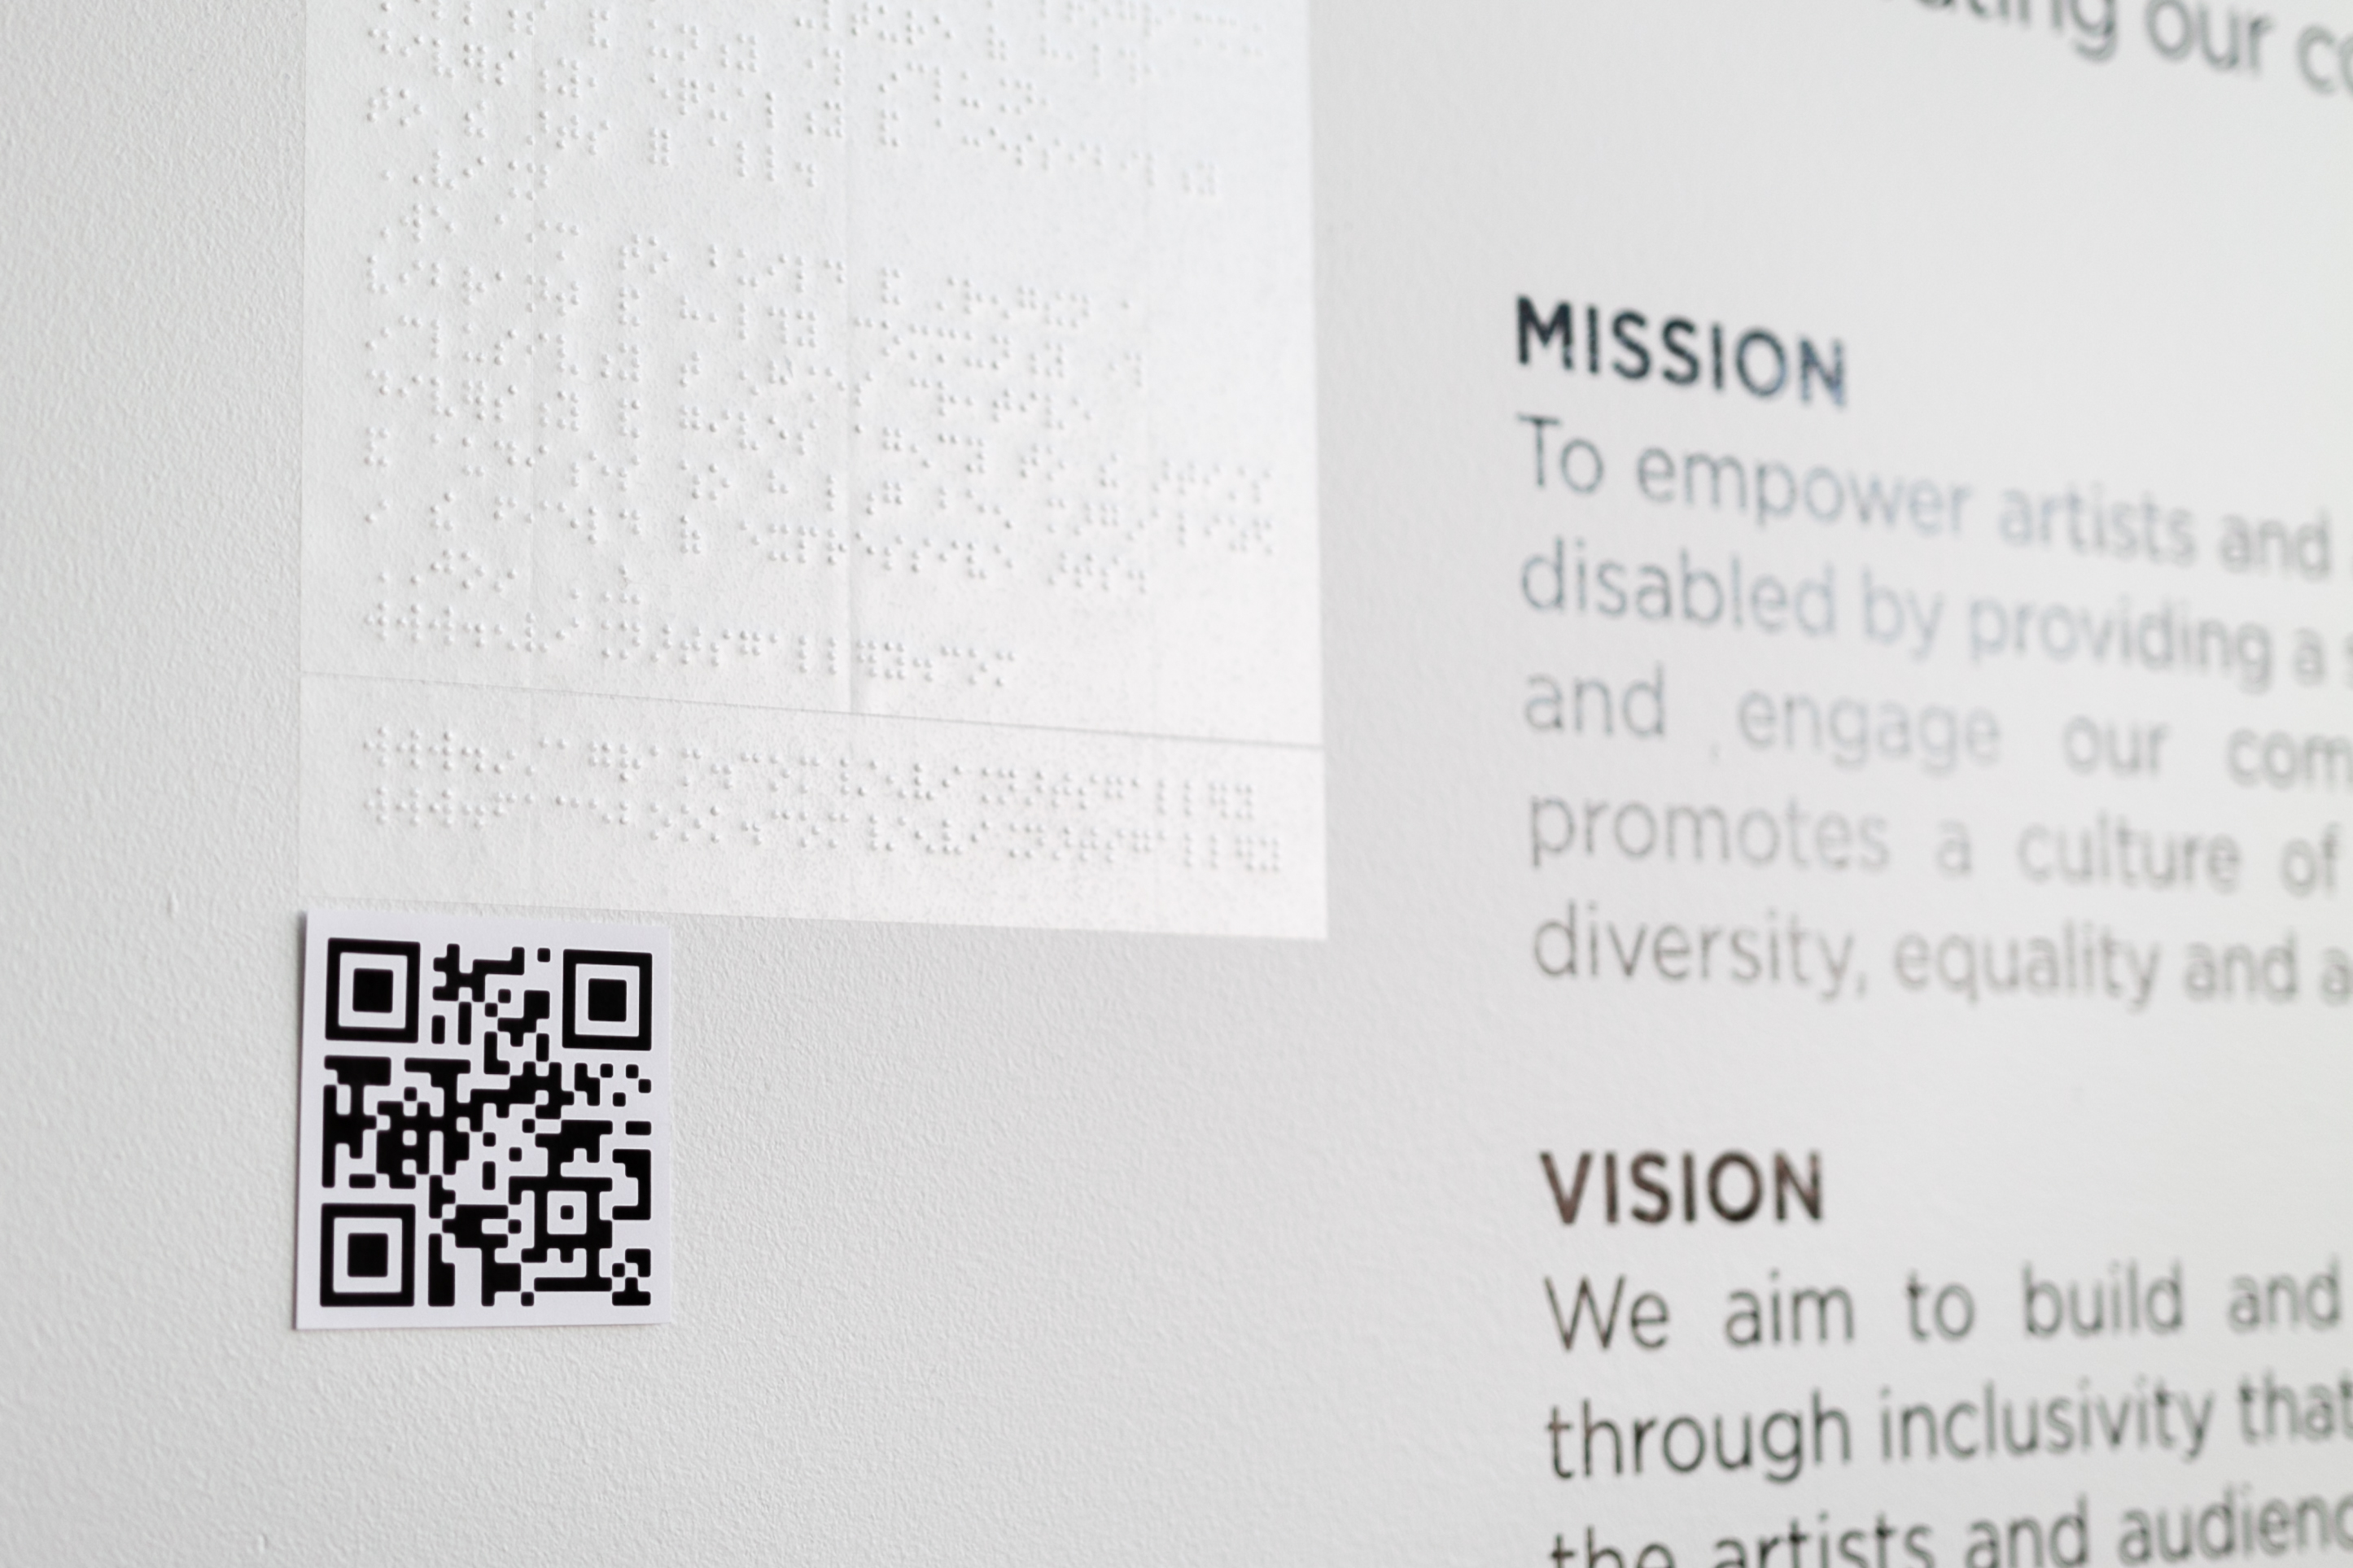 Envision Arts Gallery wall with mission state and information and then braille next to it with a QR code as well that leads to a PDF of the words on the wall